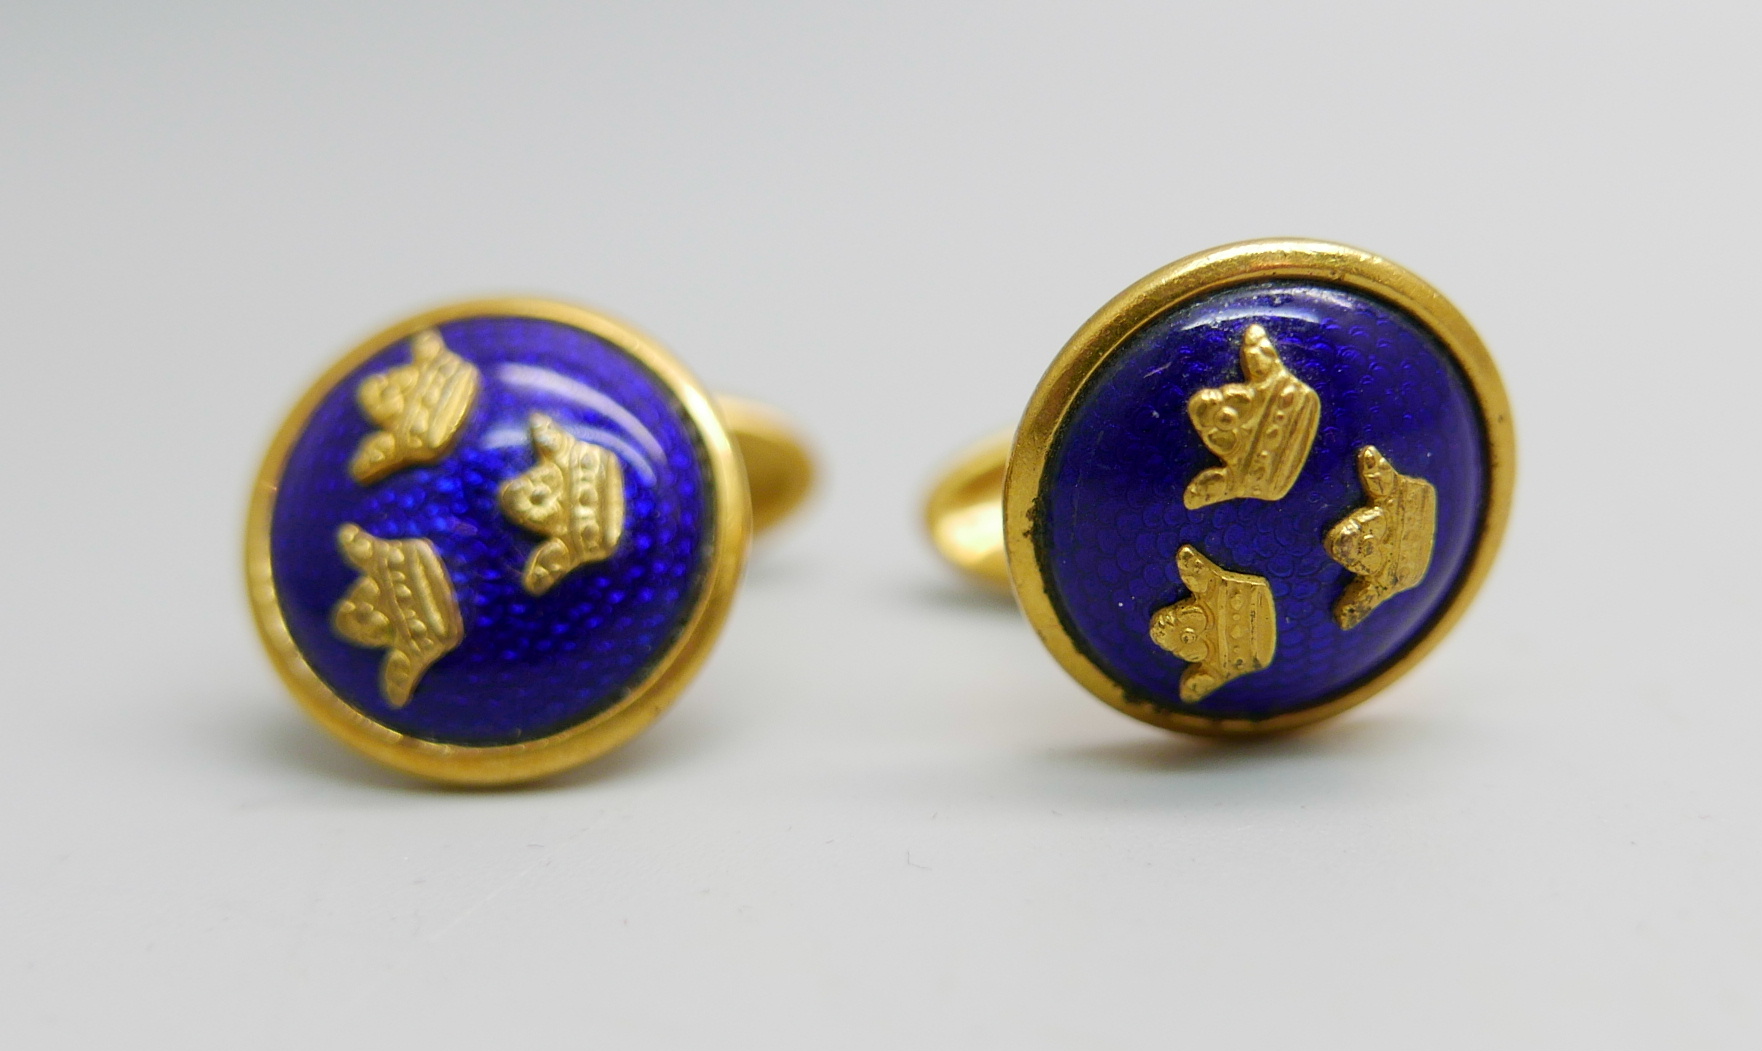 A pair of Swedish gilt metal and blue enamel cufflinks by Sporrong & Co. - Image 4 of 4